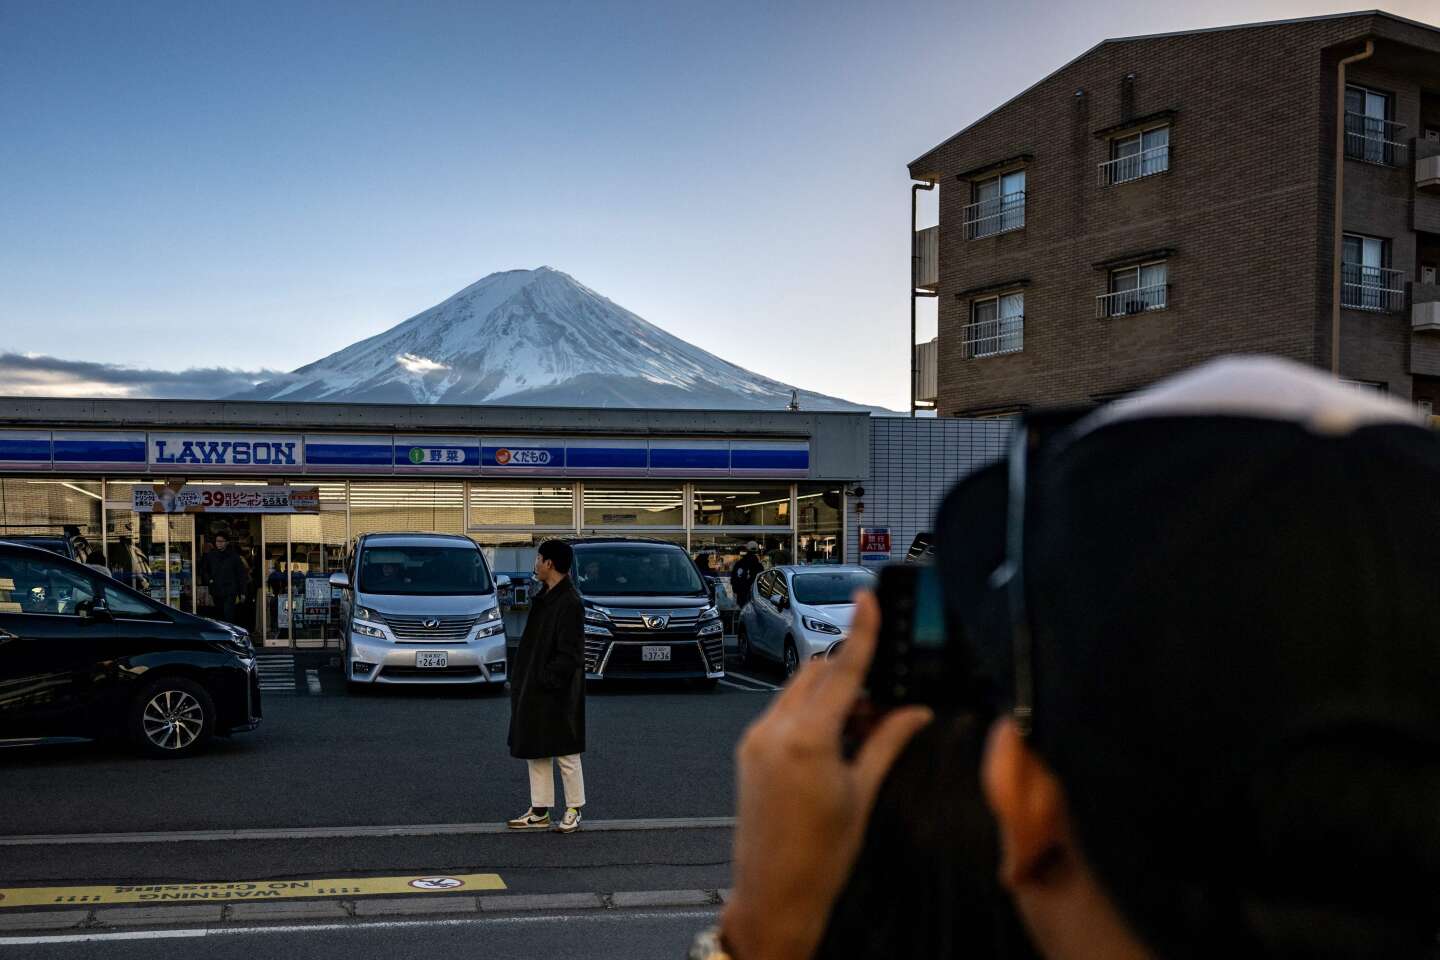 In Japan, a city will hide its view of Mount Fuji to avoid tourism